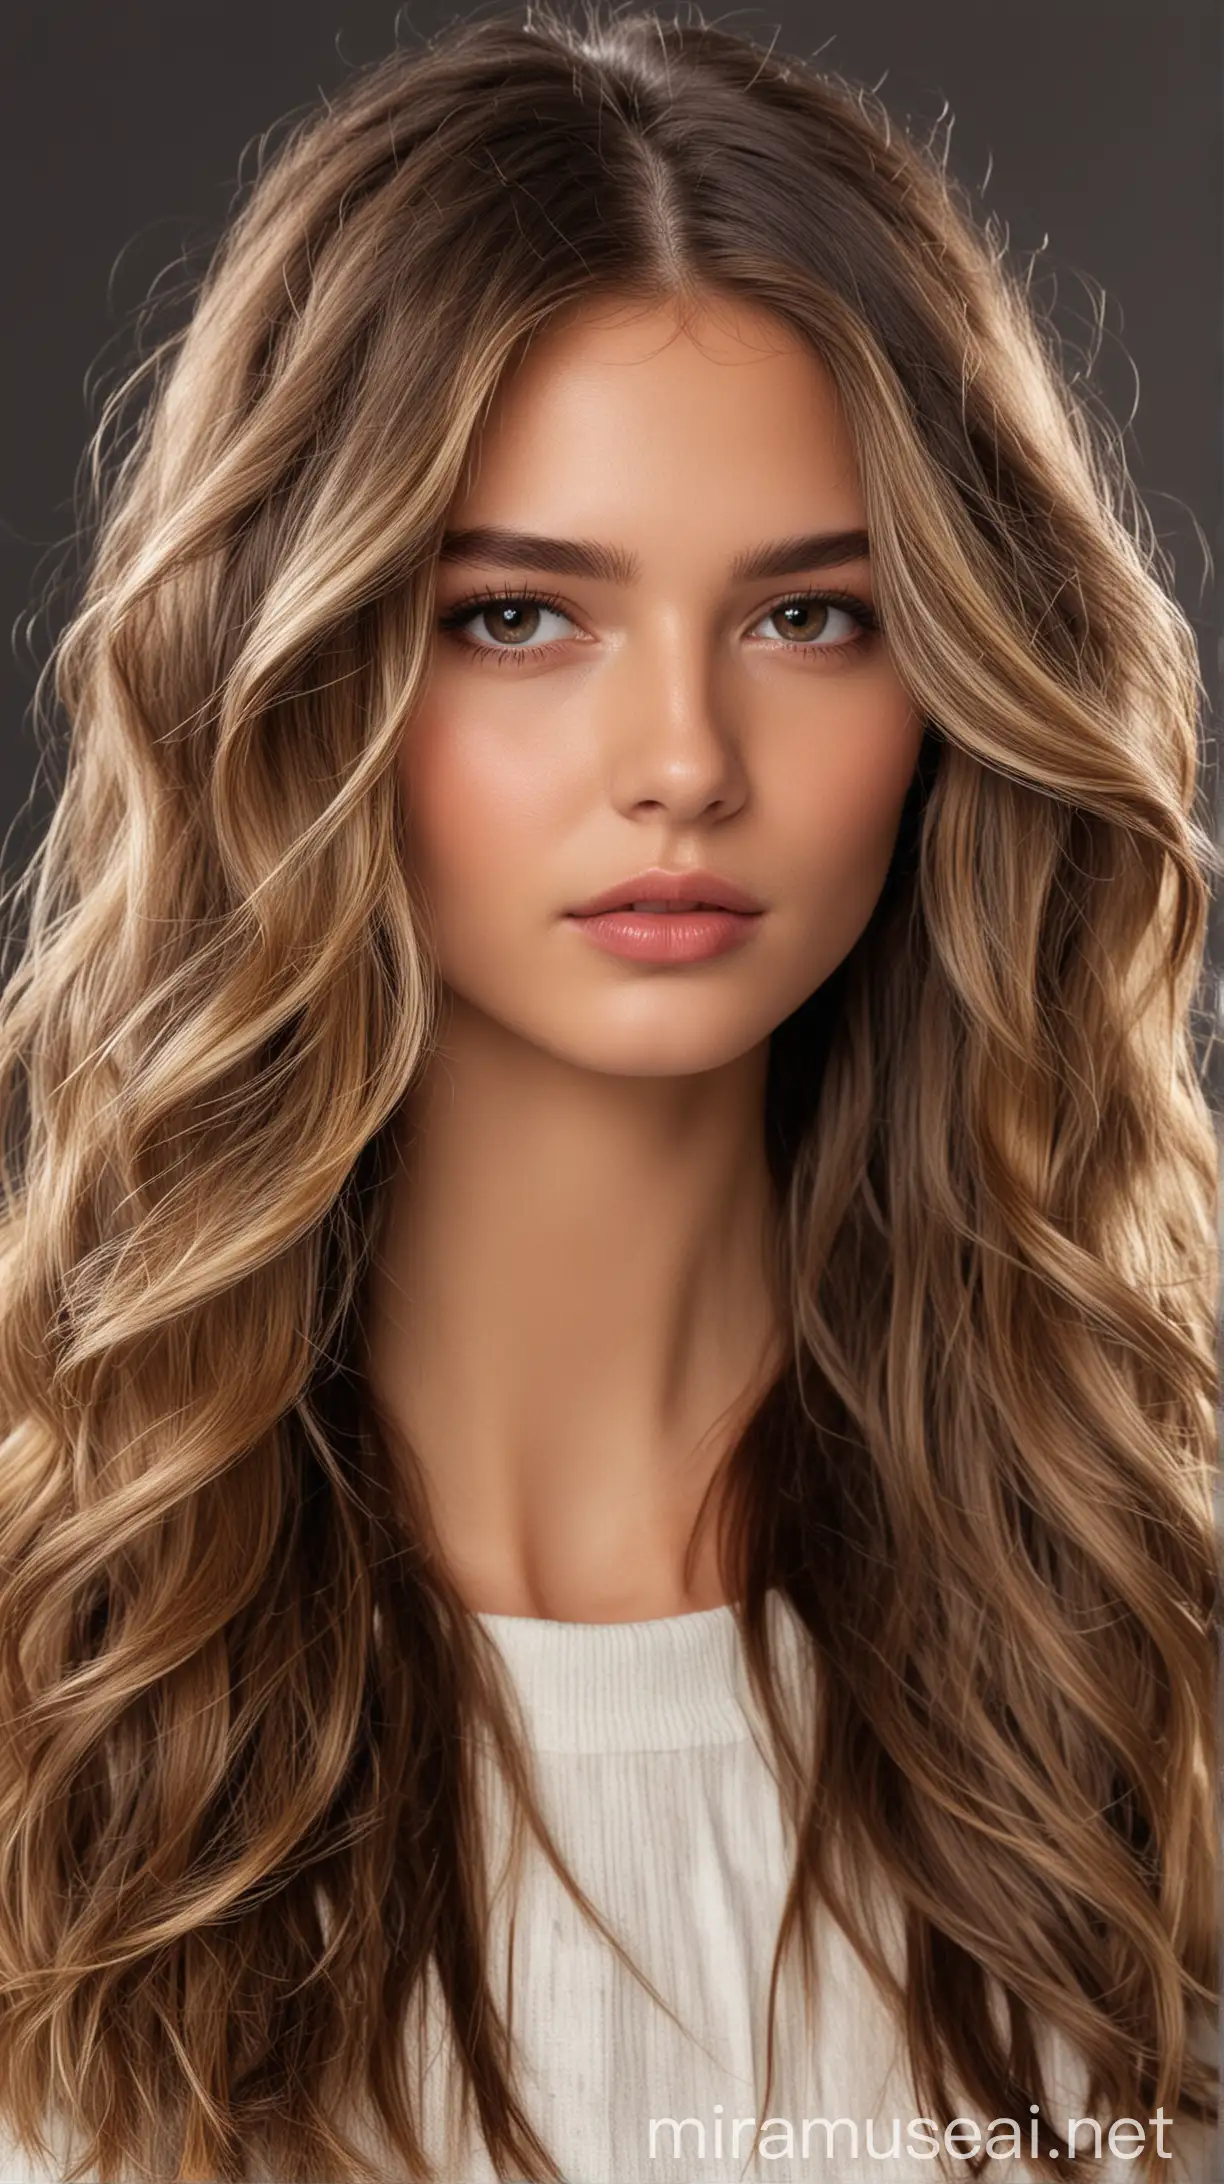 Spectacular model with brunette balayage hair